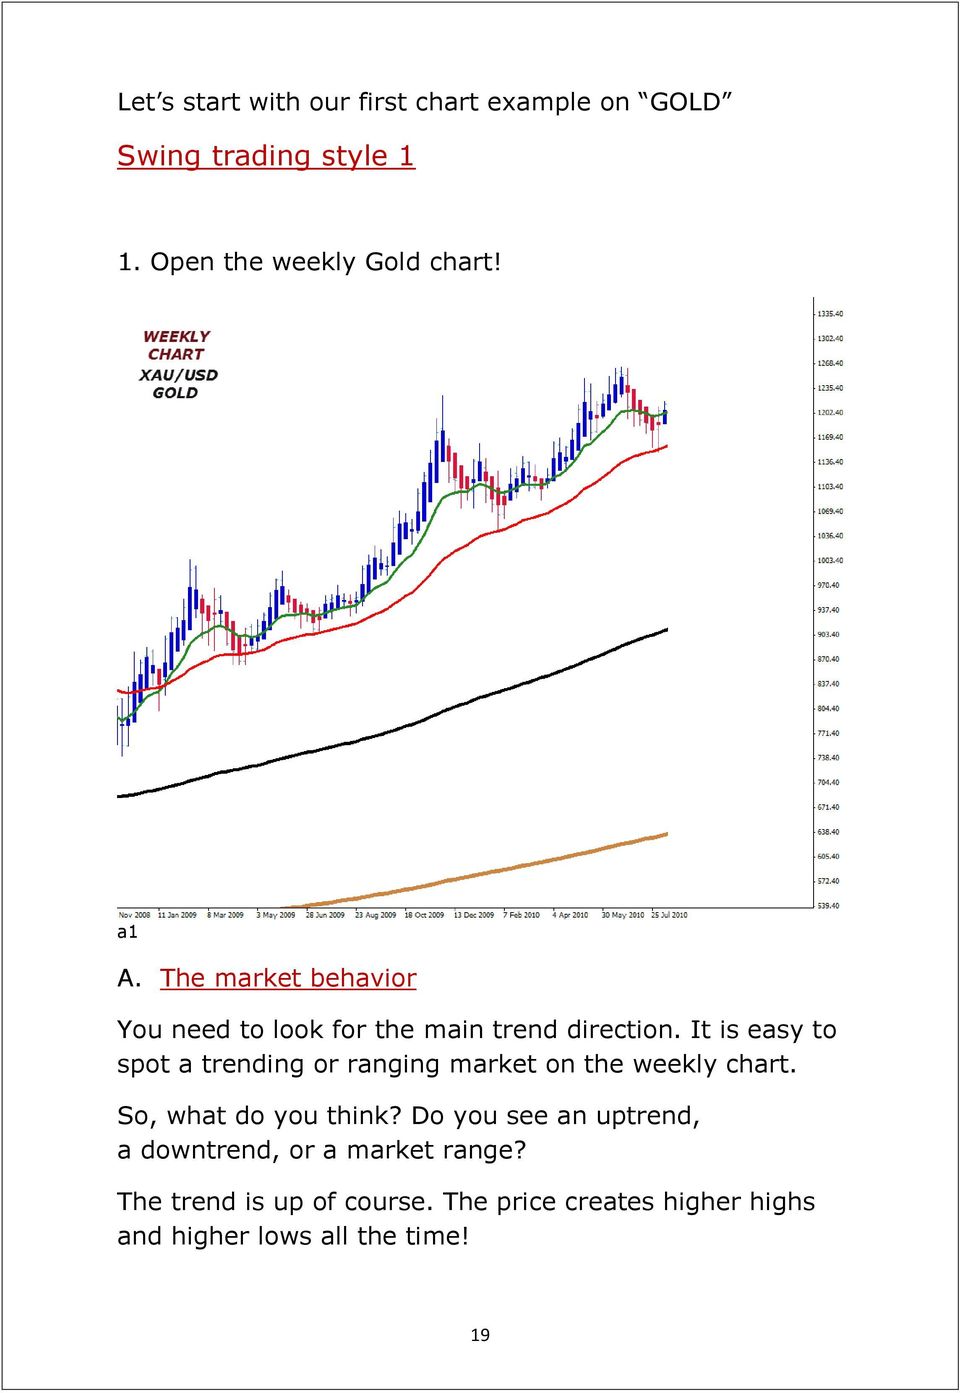 It is easy to spot a trending or ranging market on the weekly chart. So, what do you think?